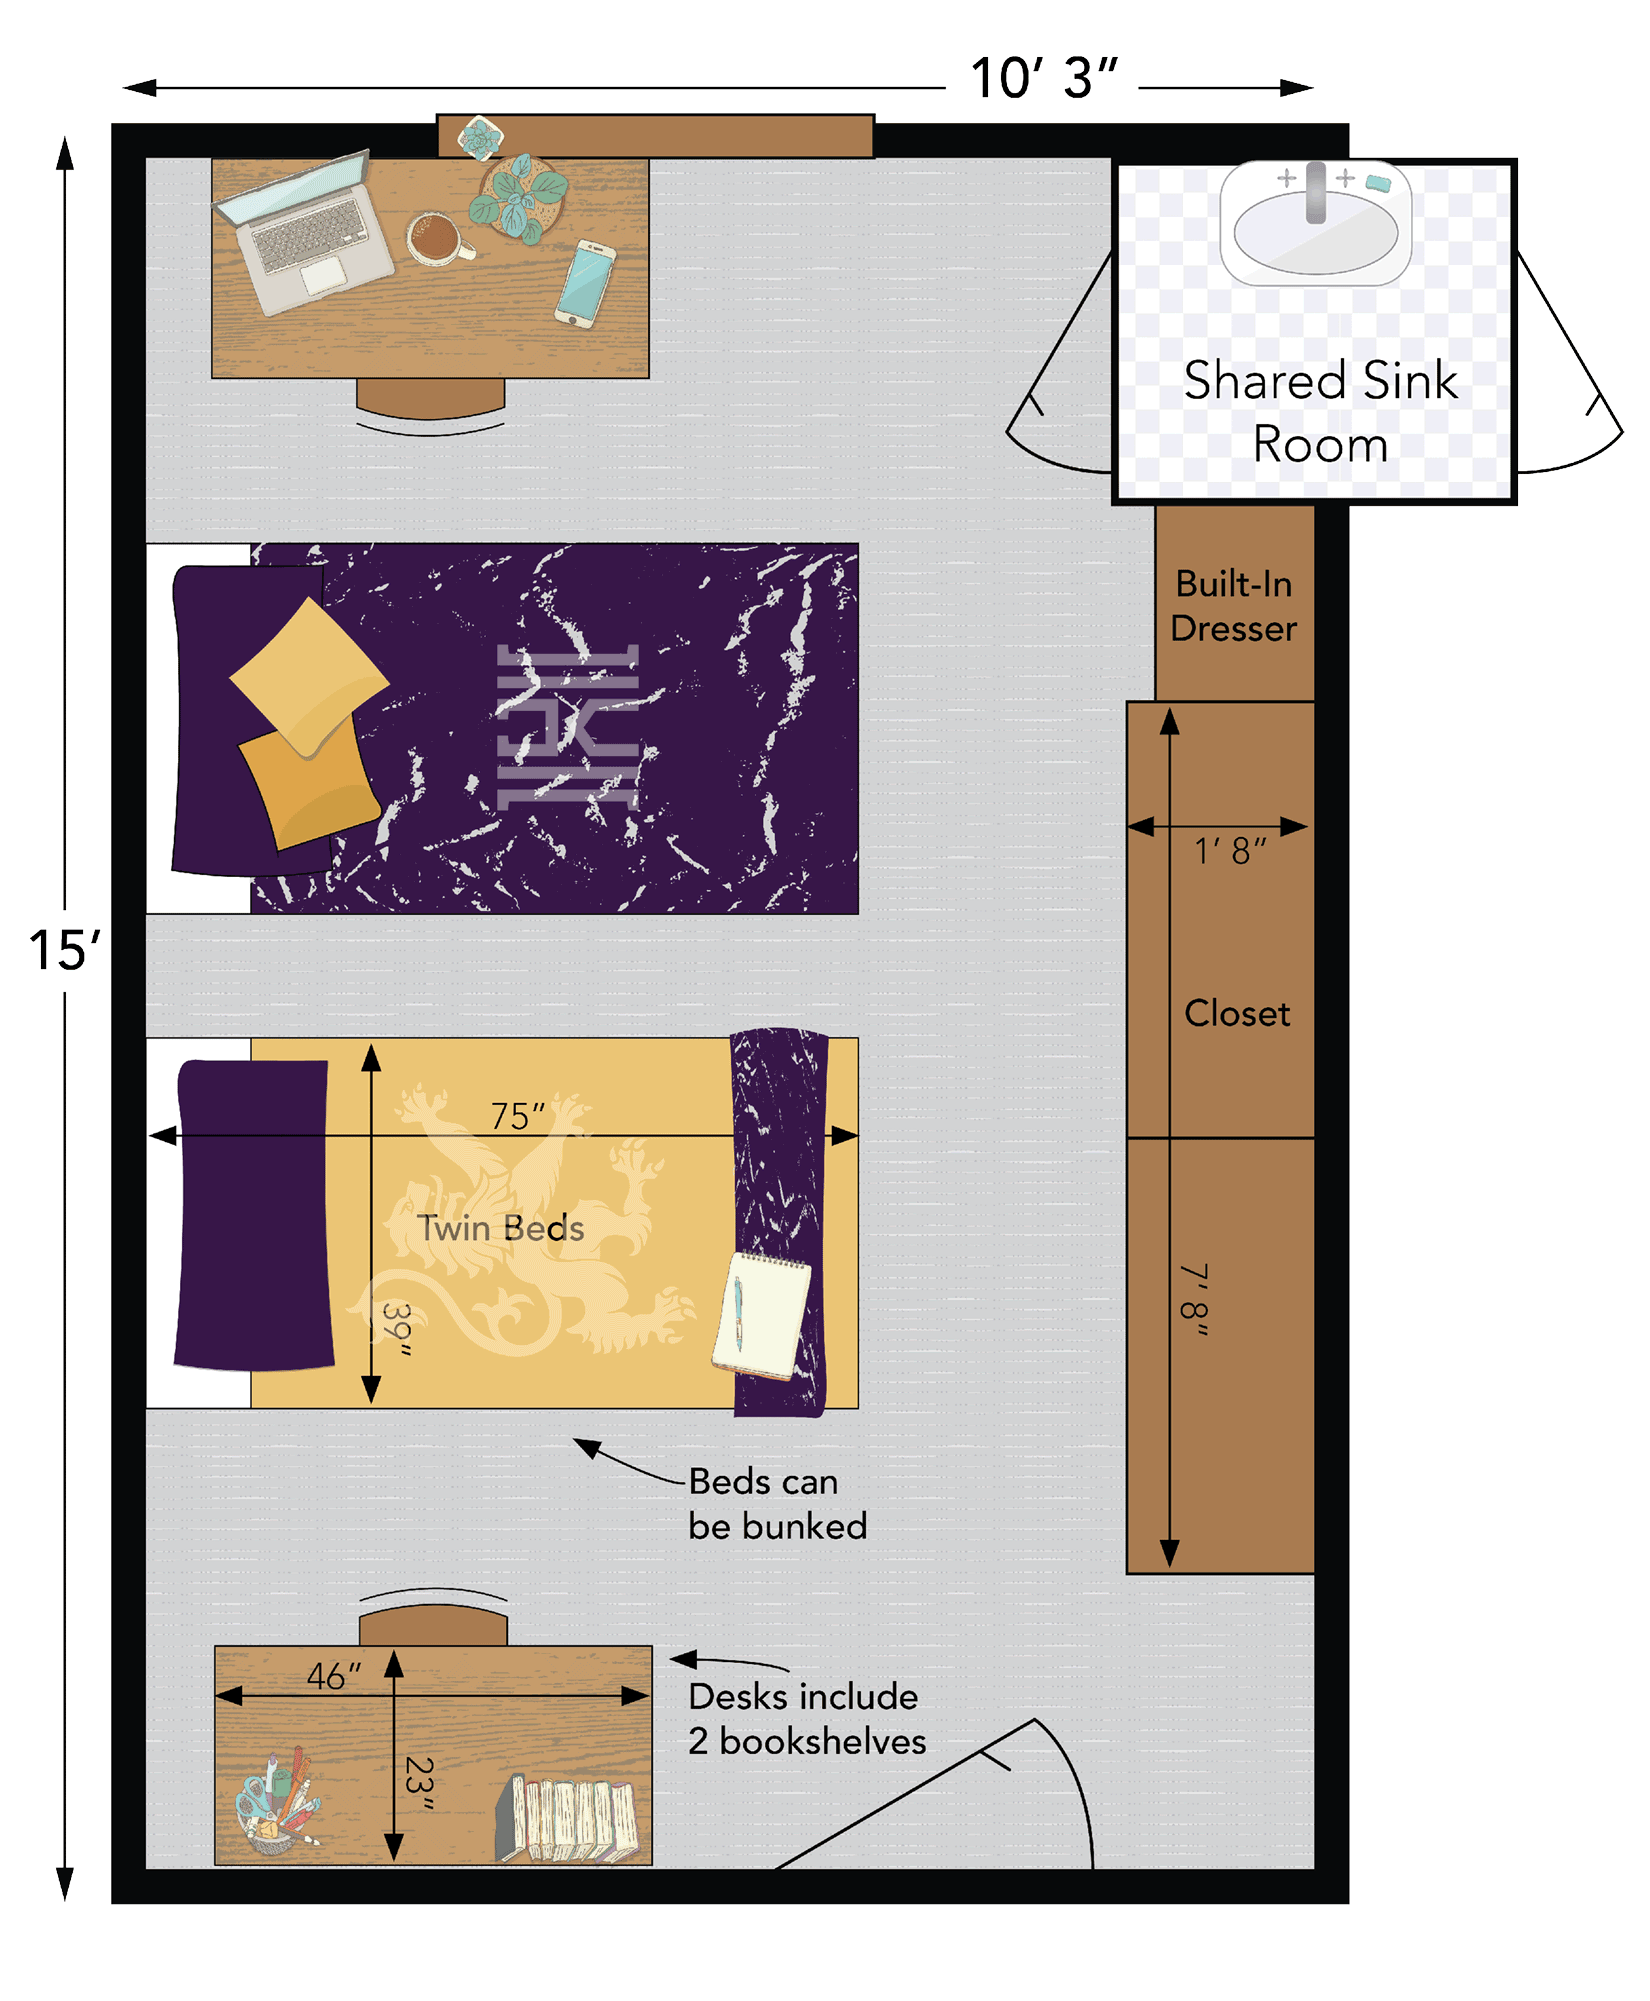 Diagram of the interior of a room at Gillette Hall at Houghton.